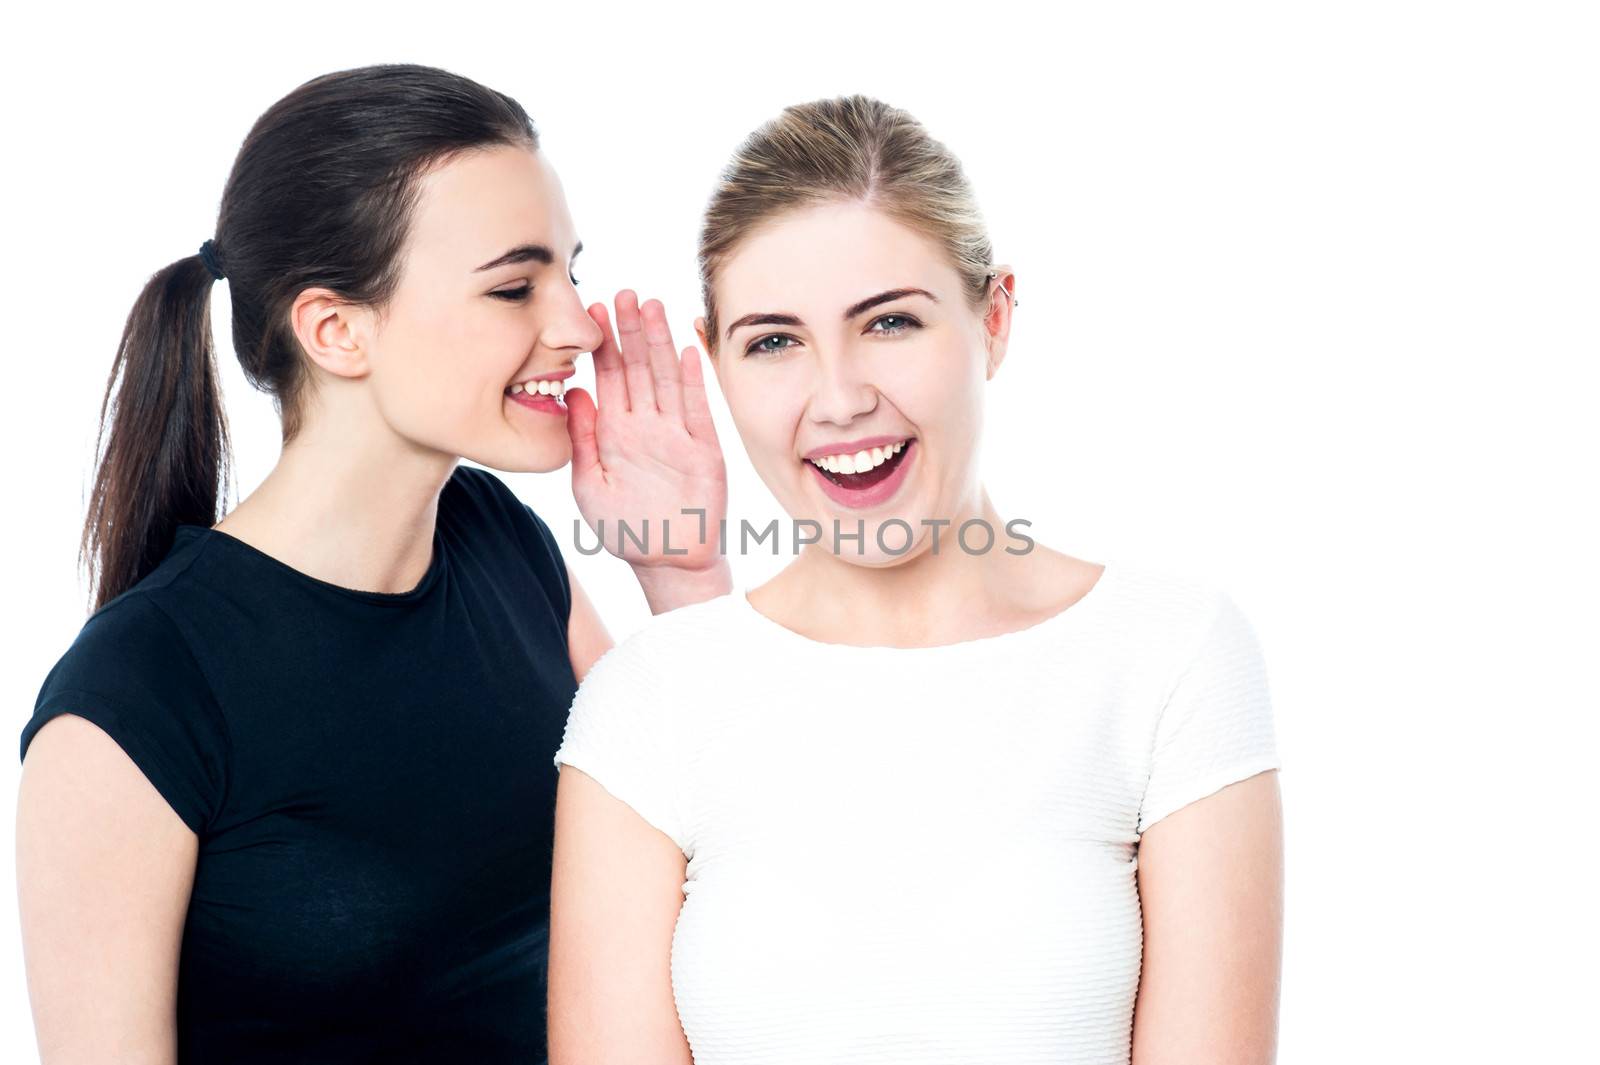 Young girls gossiping and having fun by stockyimages